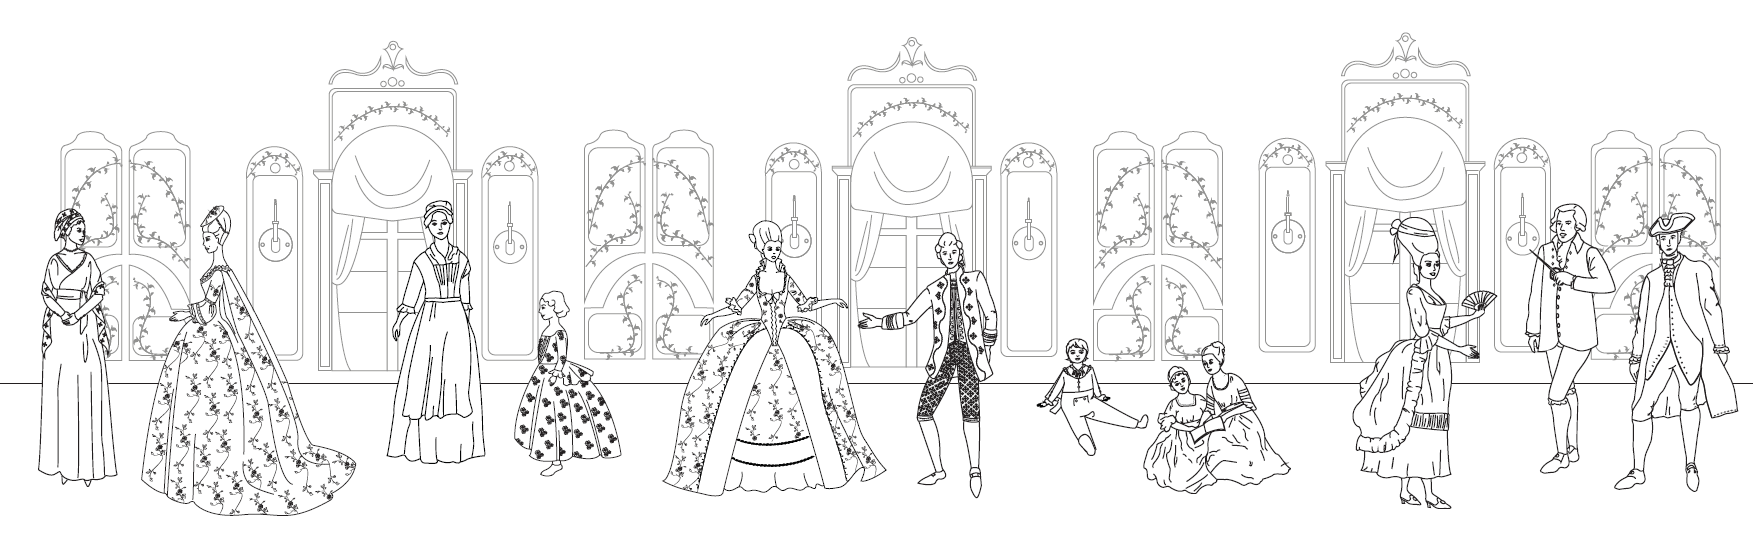 Full Court Illustration from Les Modes Magnifiques by Aine Hawthorne and Abby Detrick